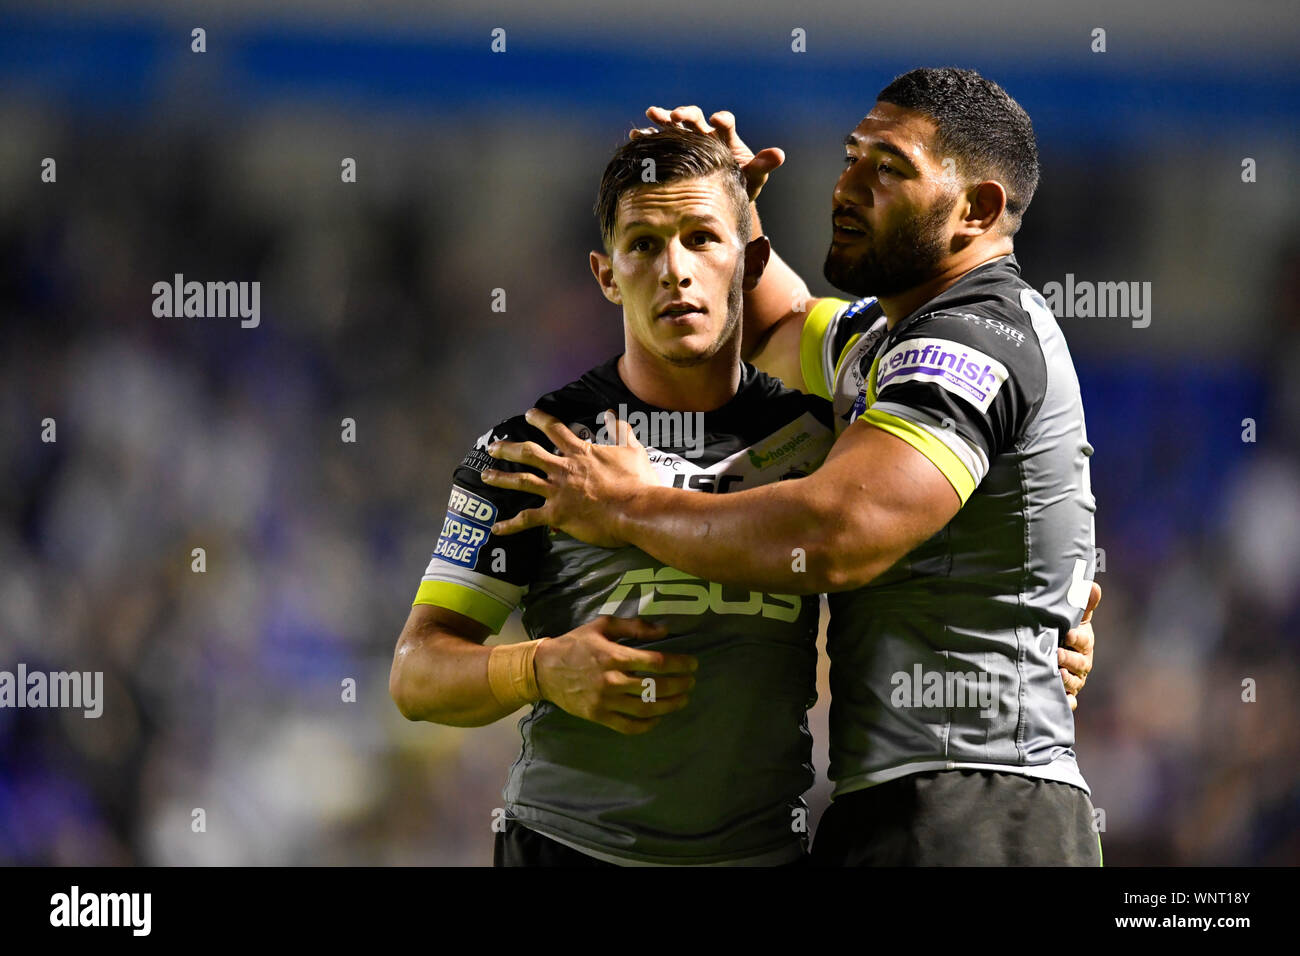 6th September 2019; Halliwell Jones Stadium, Warrington, Lancashire, England; Betfred Super League Rugby, Warrington Wolves versus Wakefield Trinity; Kelepi Tanginoa of Wakefield Trinity consoles Morgan Escare after their 23 - 16 defeat to Warrington Wolves - Editorial Use Only. Stock Photo